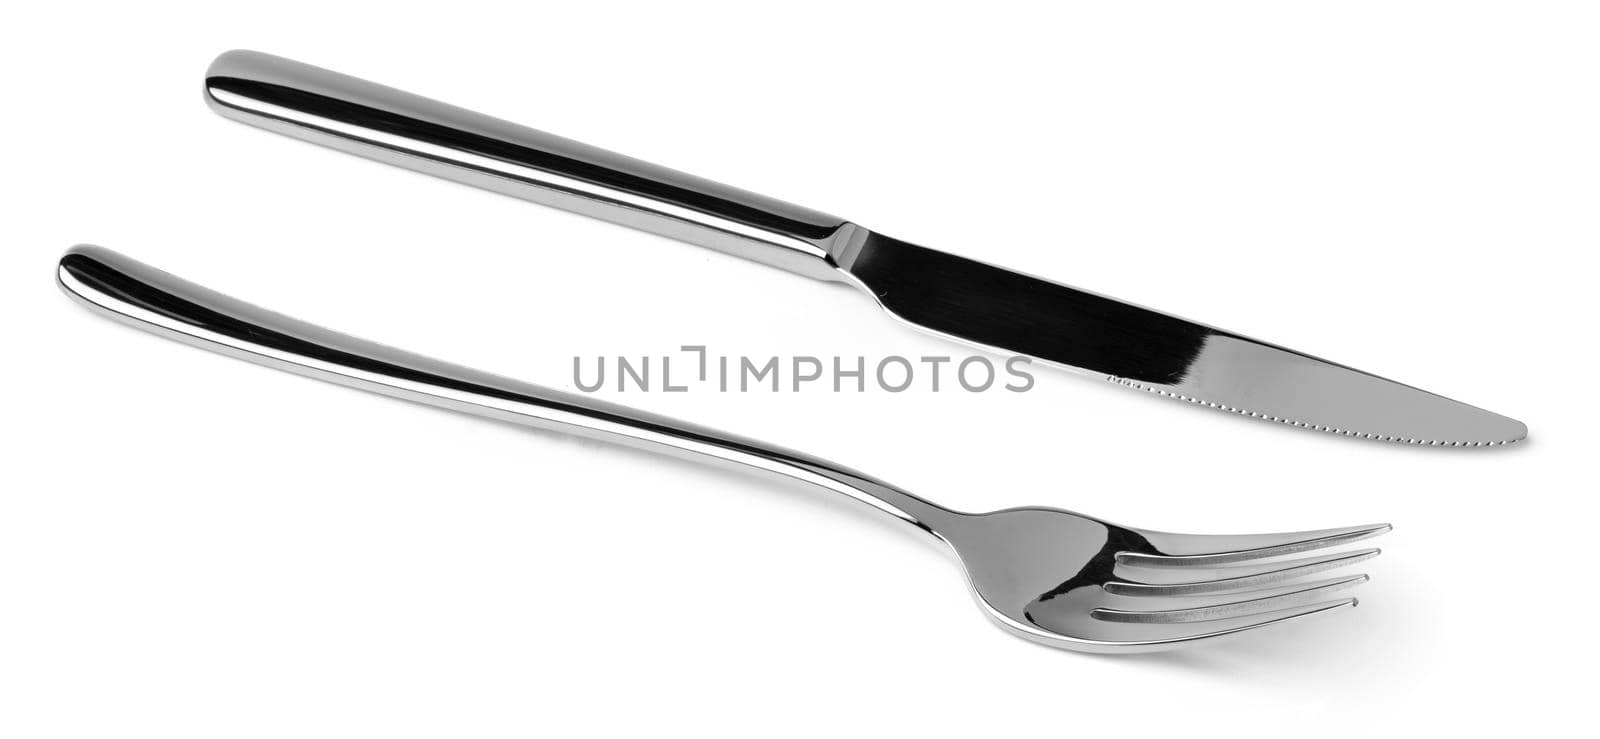 Silver fork and knife isolated on white background close up